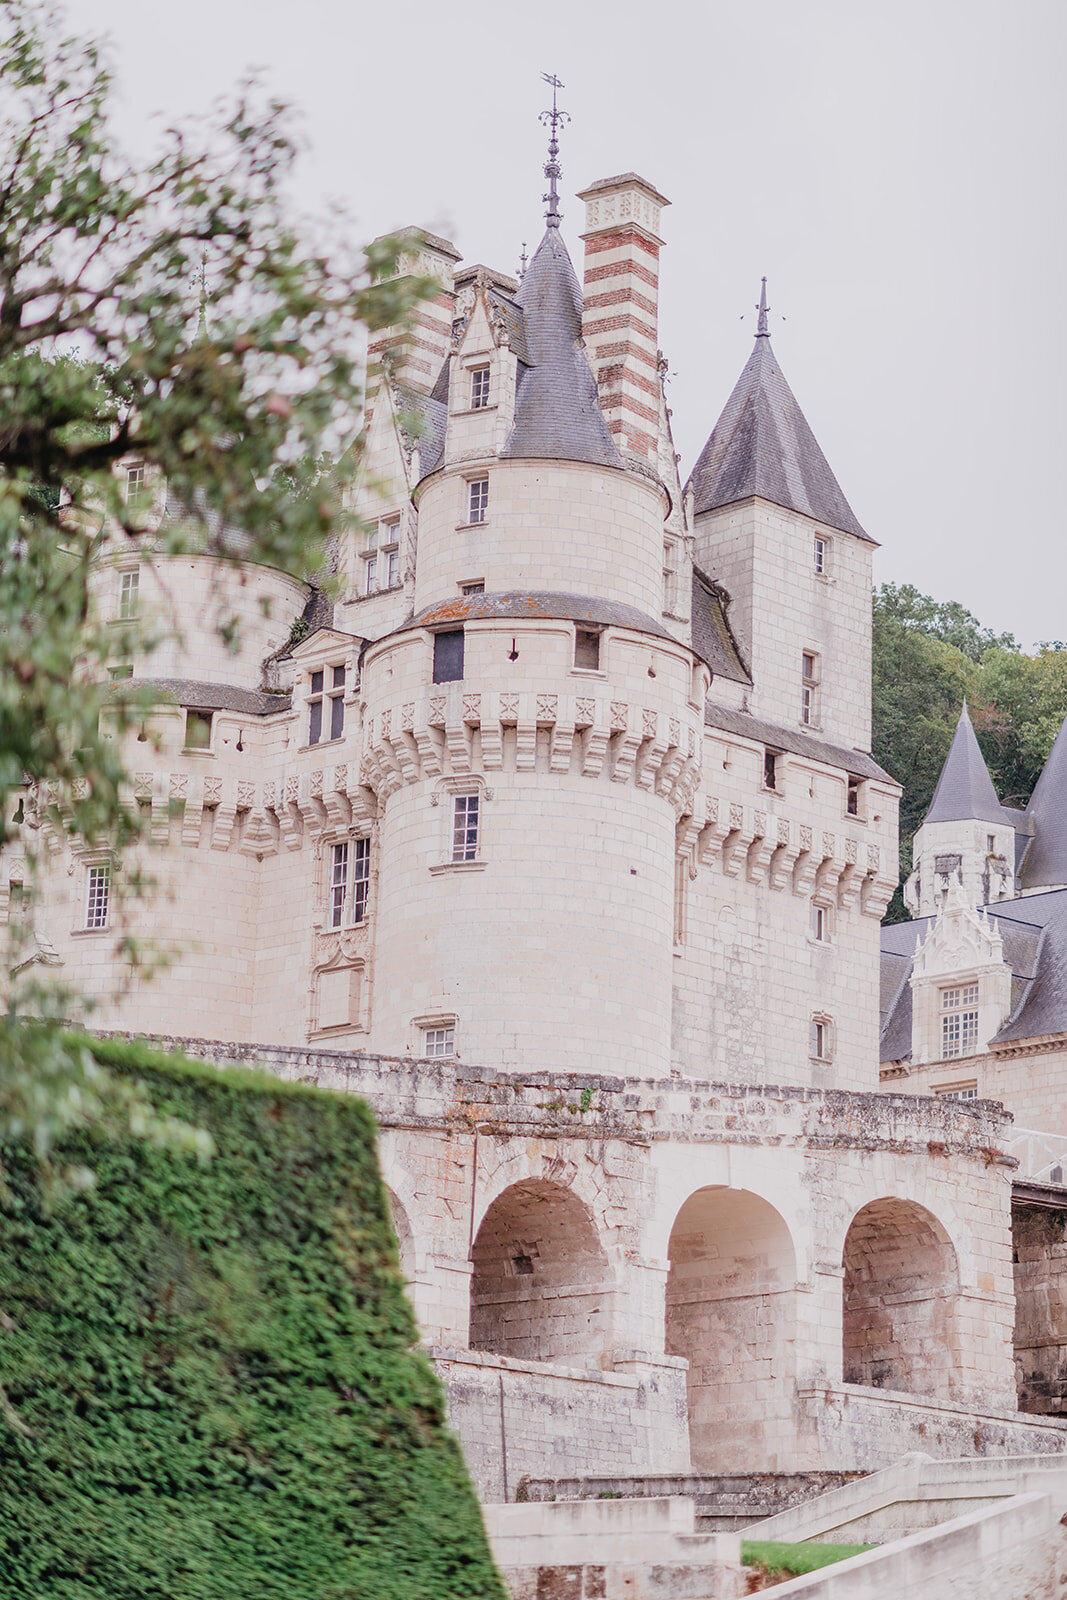 MorganeBallPhotography-ChateauLoire-07-Usse-80- 4293_websize